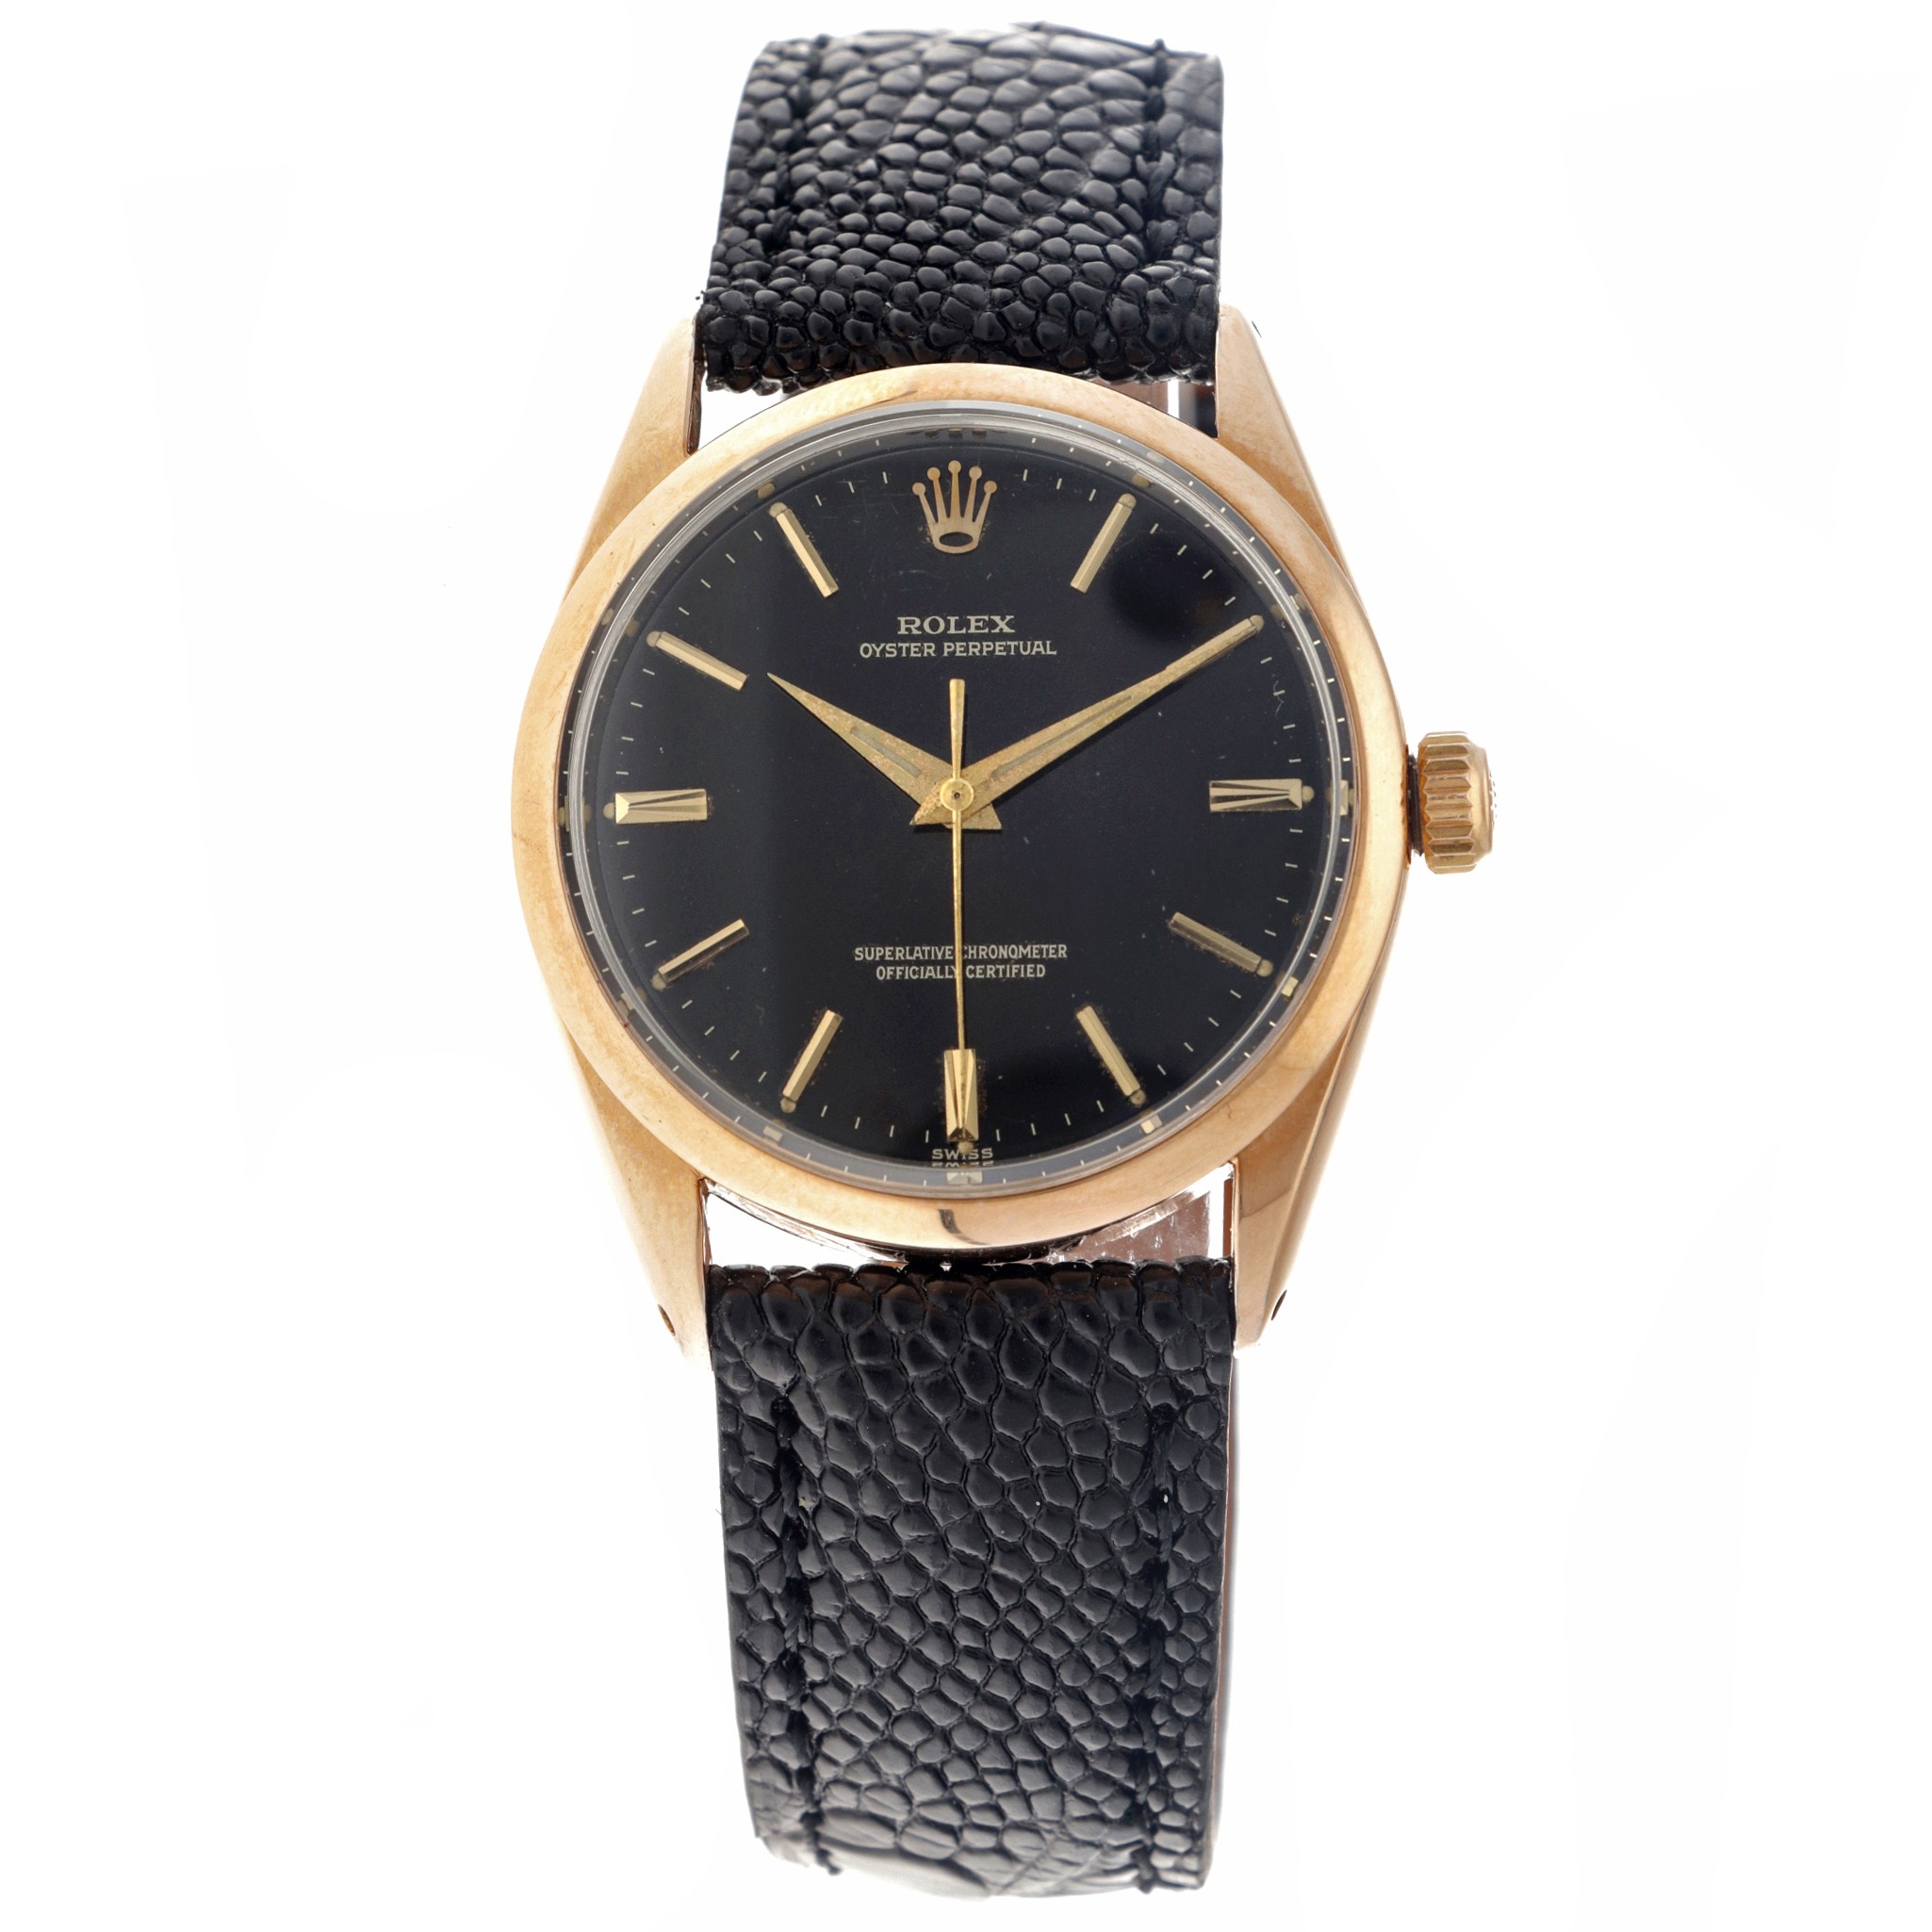 No Reserve - Rolex Oyster Perpetual 1024 - Men's watch - approx. 1961.